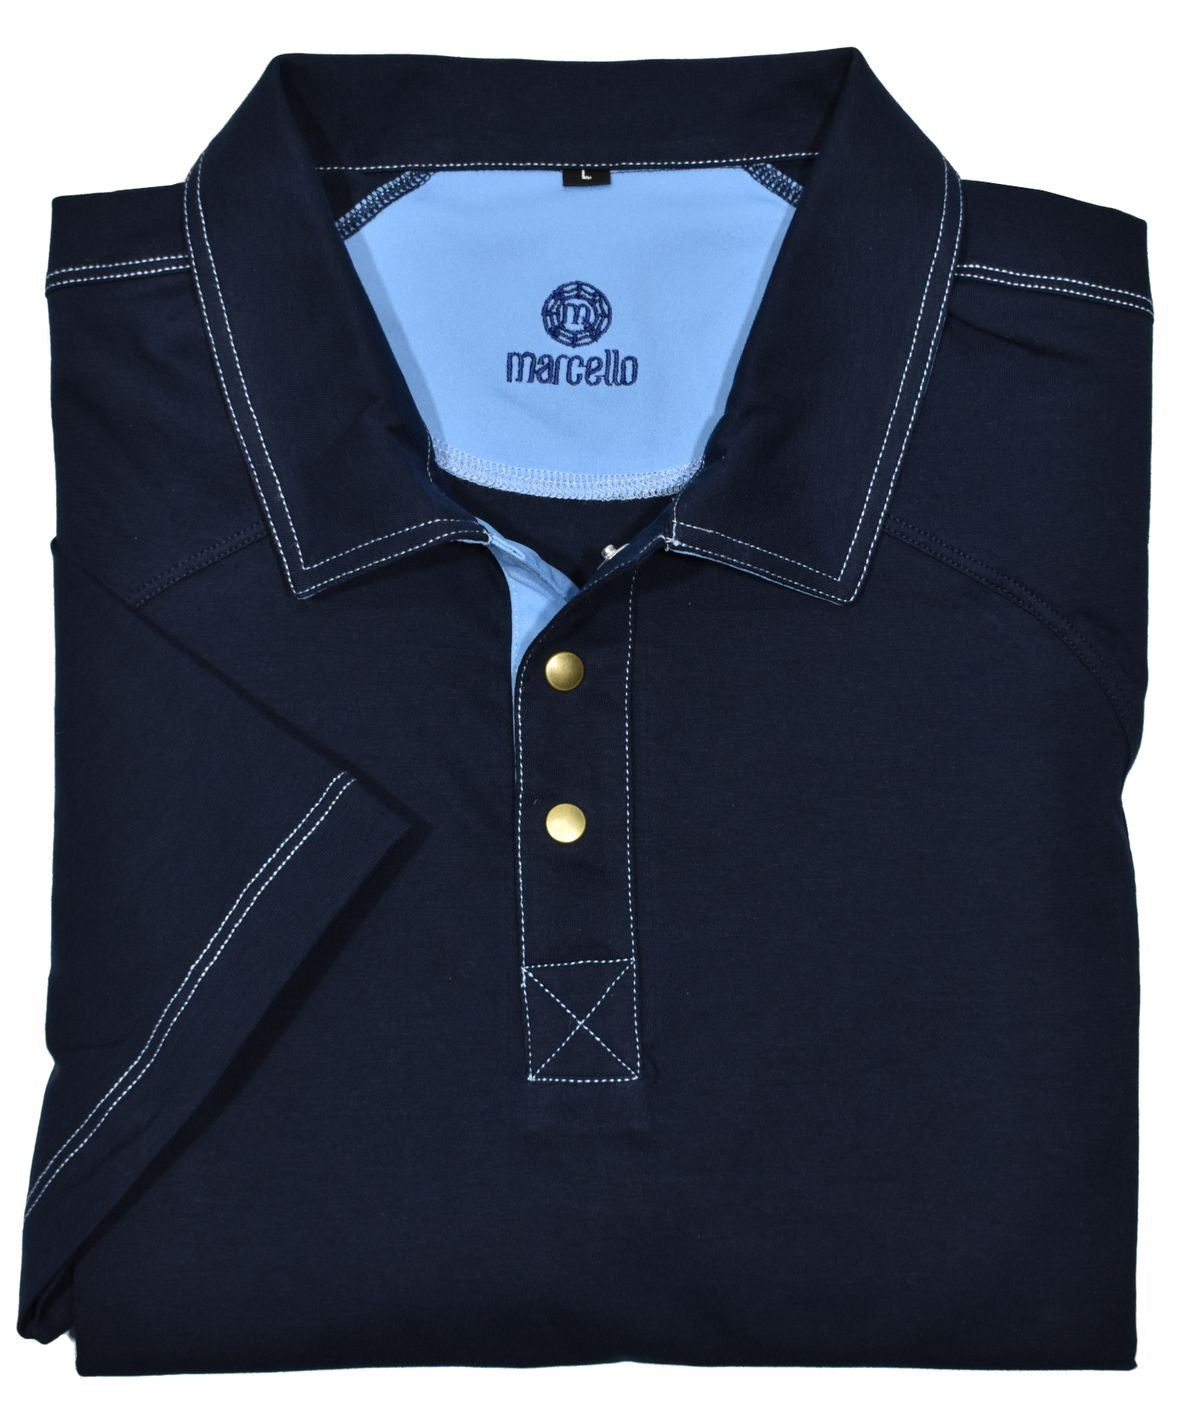 Experience the soft texture of Peruvian pima cotton in our P111 Pima Cotton Ultra Polo! With contrast stitch detailing and a snap enclosure polo collar, this ultra polo will have you feeling stylish and comfortable all day long! Get ready to be enveloped in ultimate luxury!